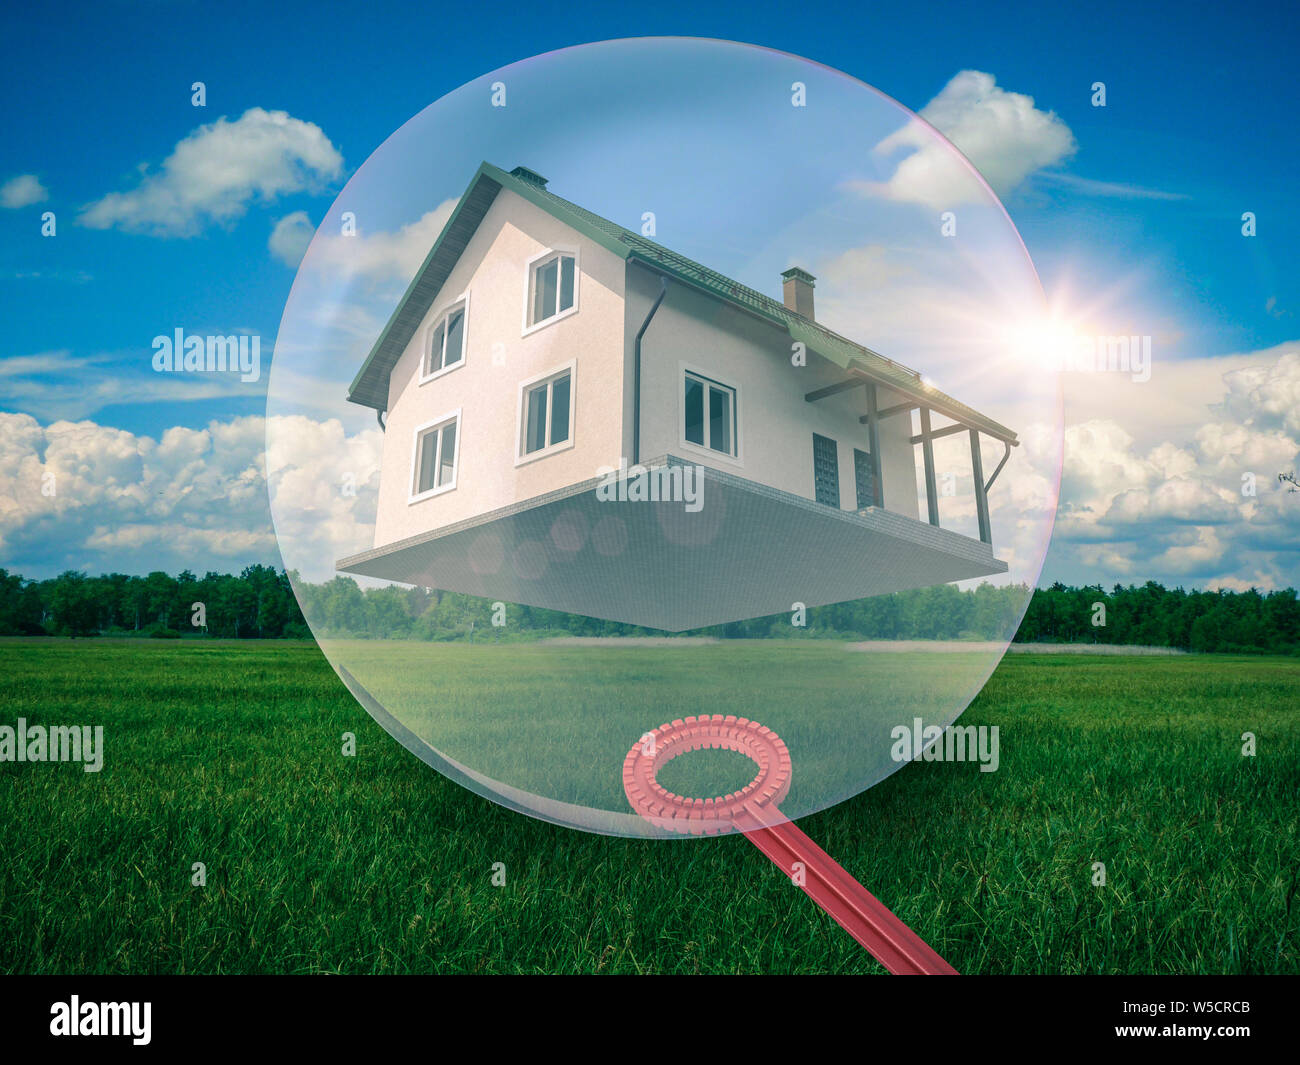 House is caught in a floating bubble- 3D-Illustration Stock Photo